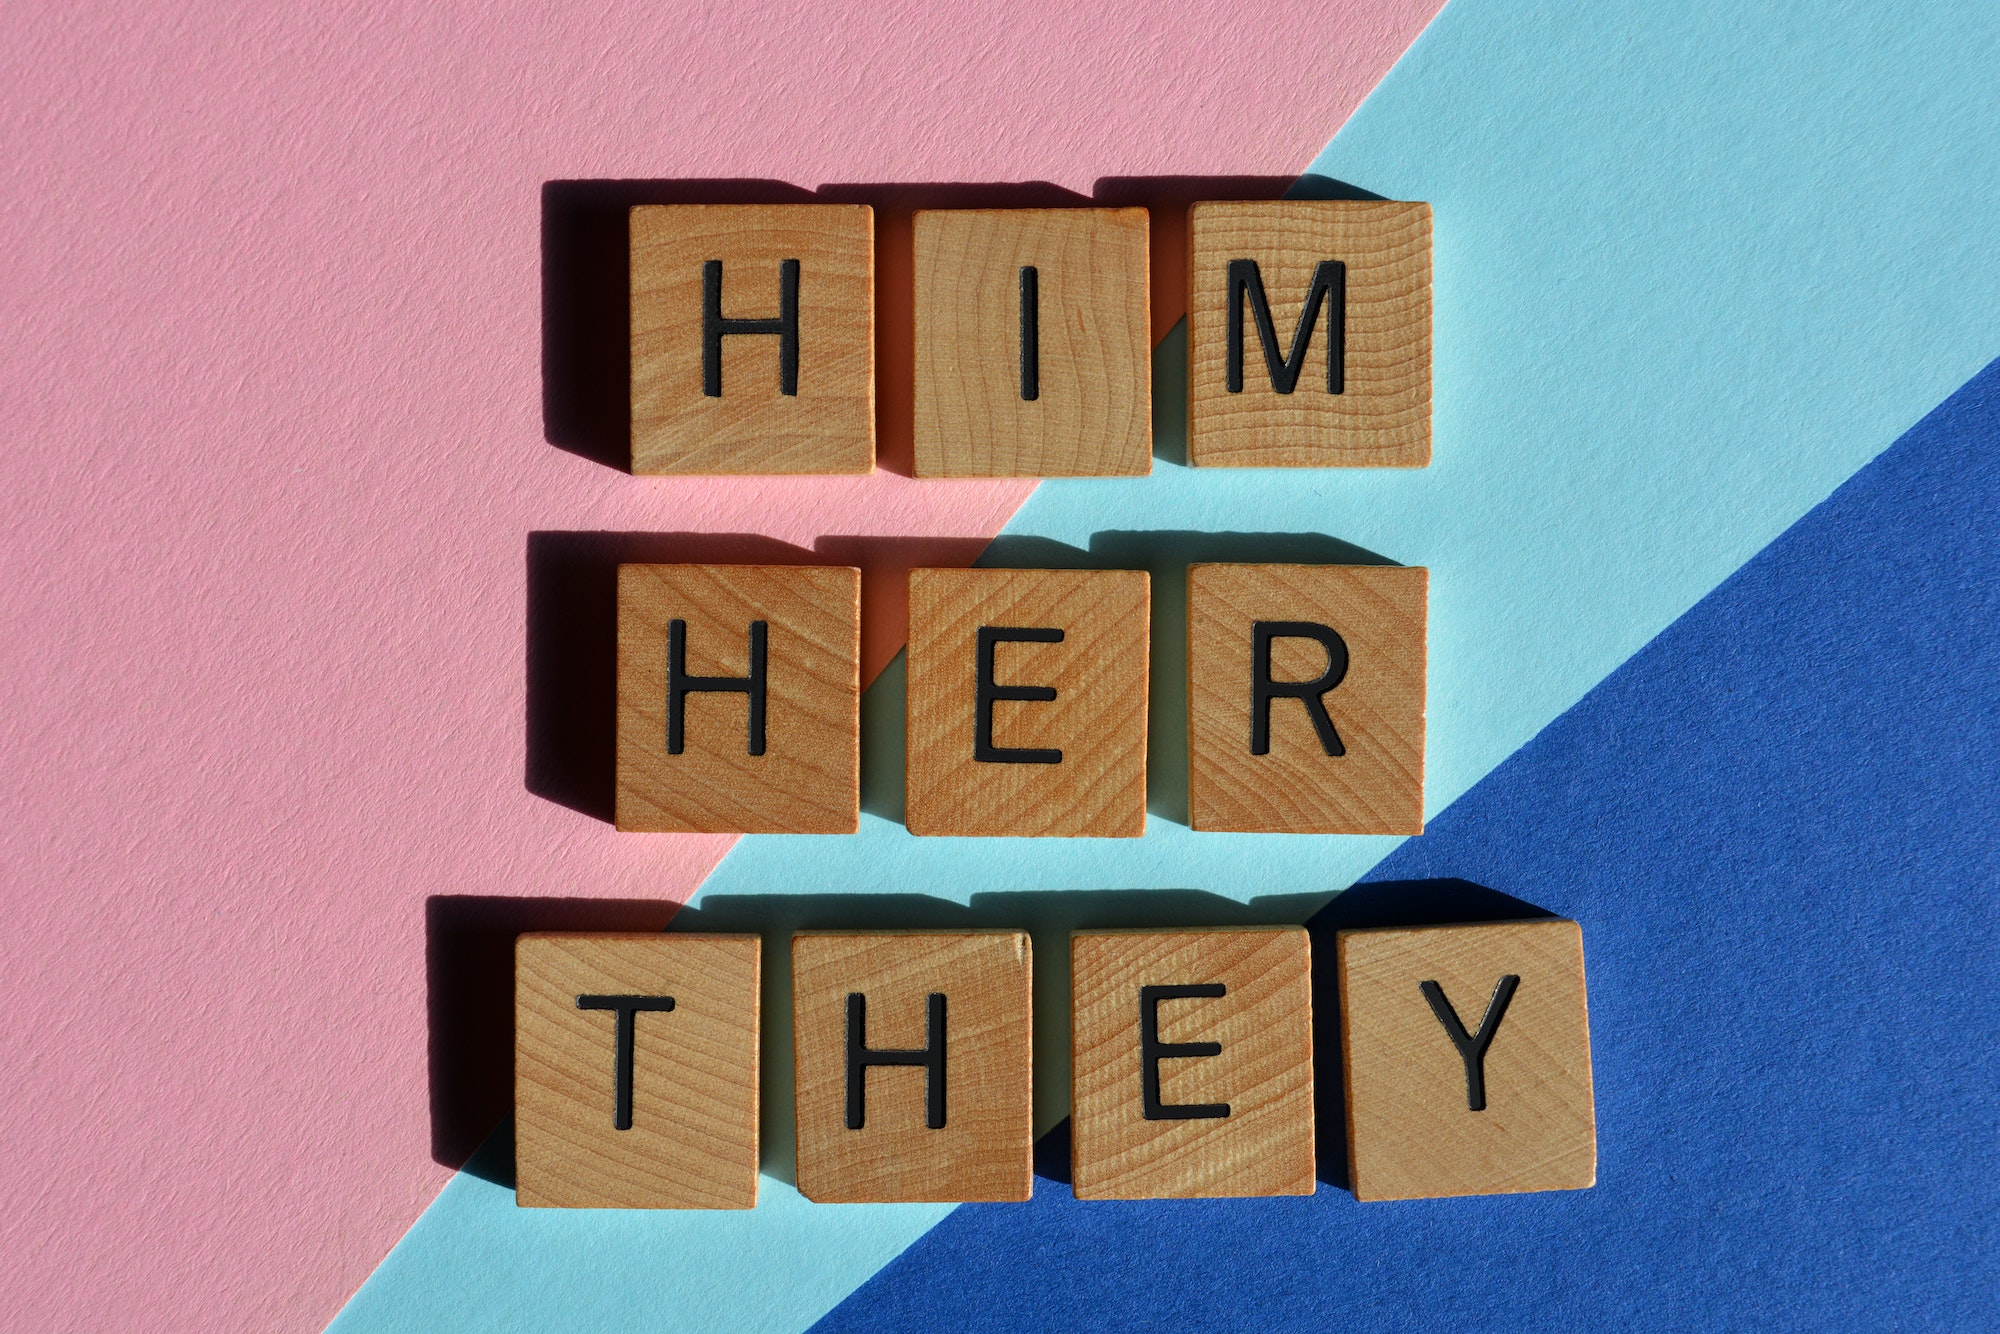 Him, Her, They